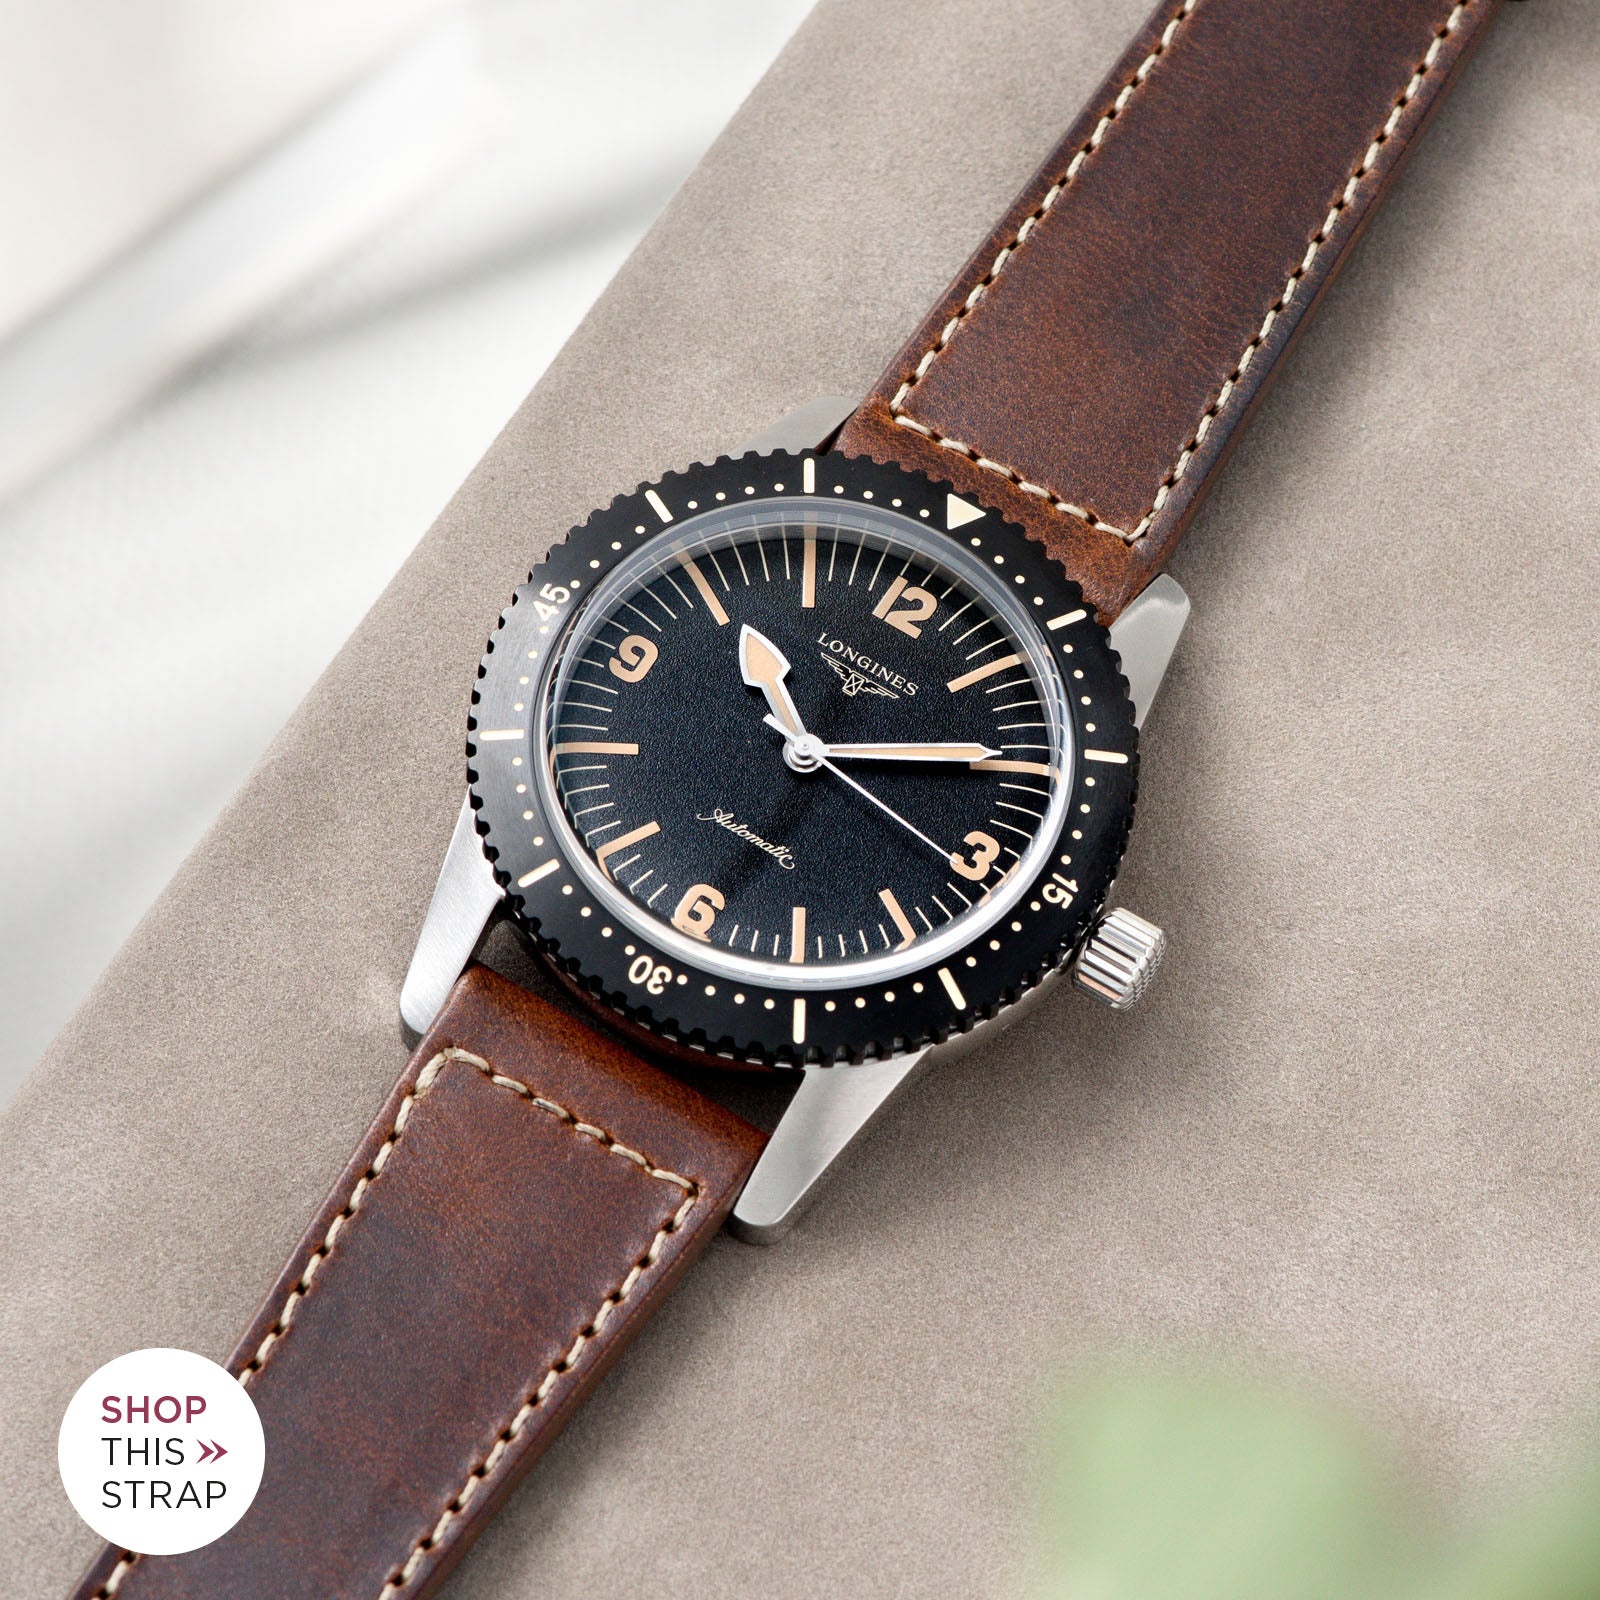 Bulang and Sons_Strap Guide_Longines Skin Diver__Siena Brown Boxed Stitch Leather Watch Strap